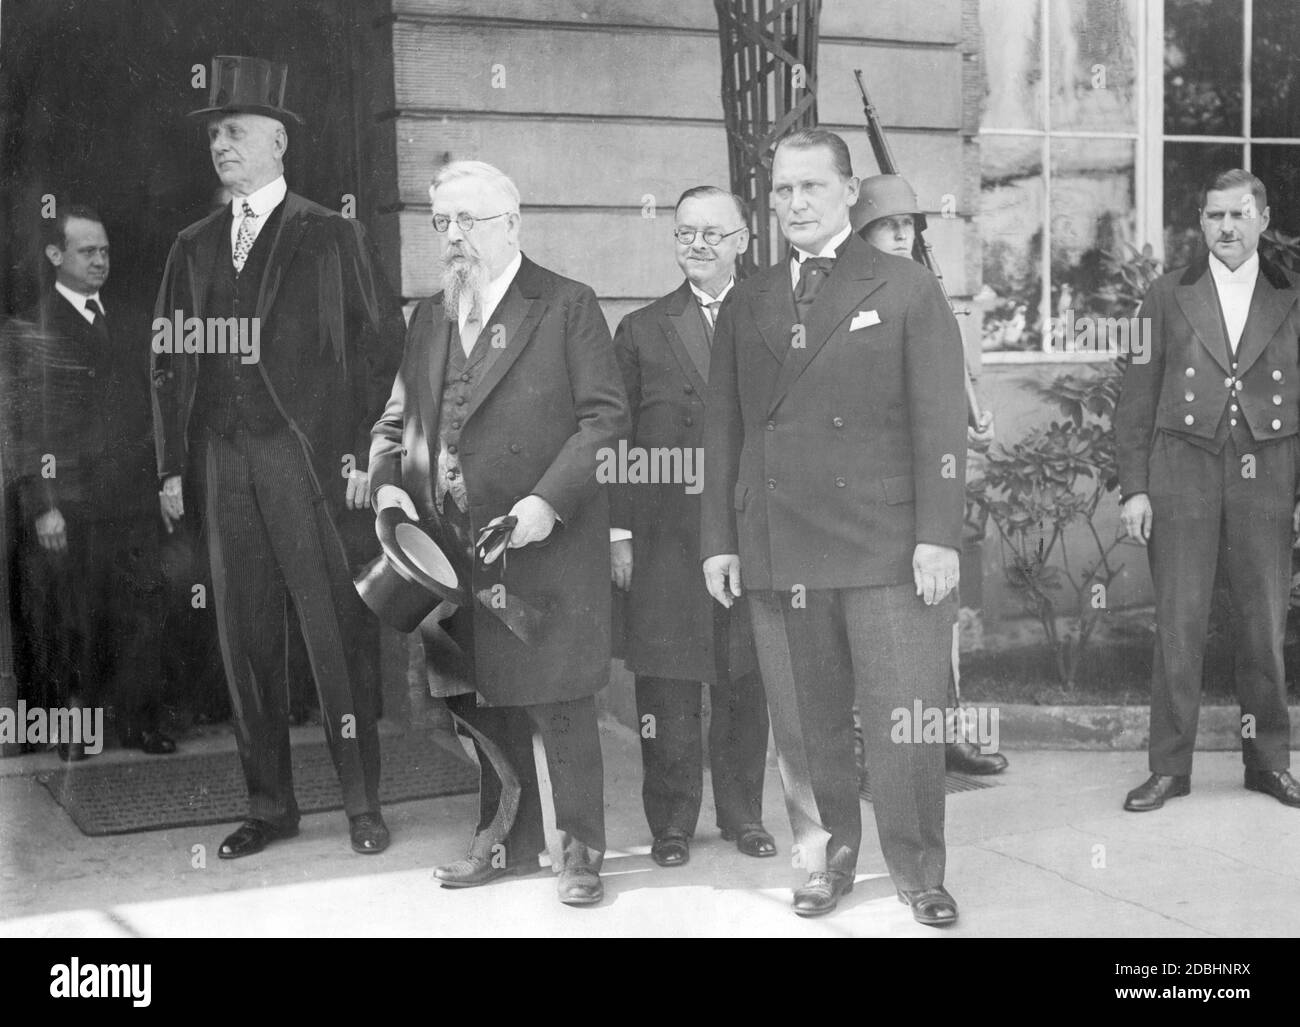 'On September 9, 1932, Paul Hindenburg received the newly elected Reichstag President Hermann Goering (NSDAP) and his deputies: Walter Graef (DNVP), Thomas Esser (Centre) and Johann ''Hans'' Rauch (BVP) in front of the Palace of the Reich President.' Stock Photo